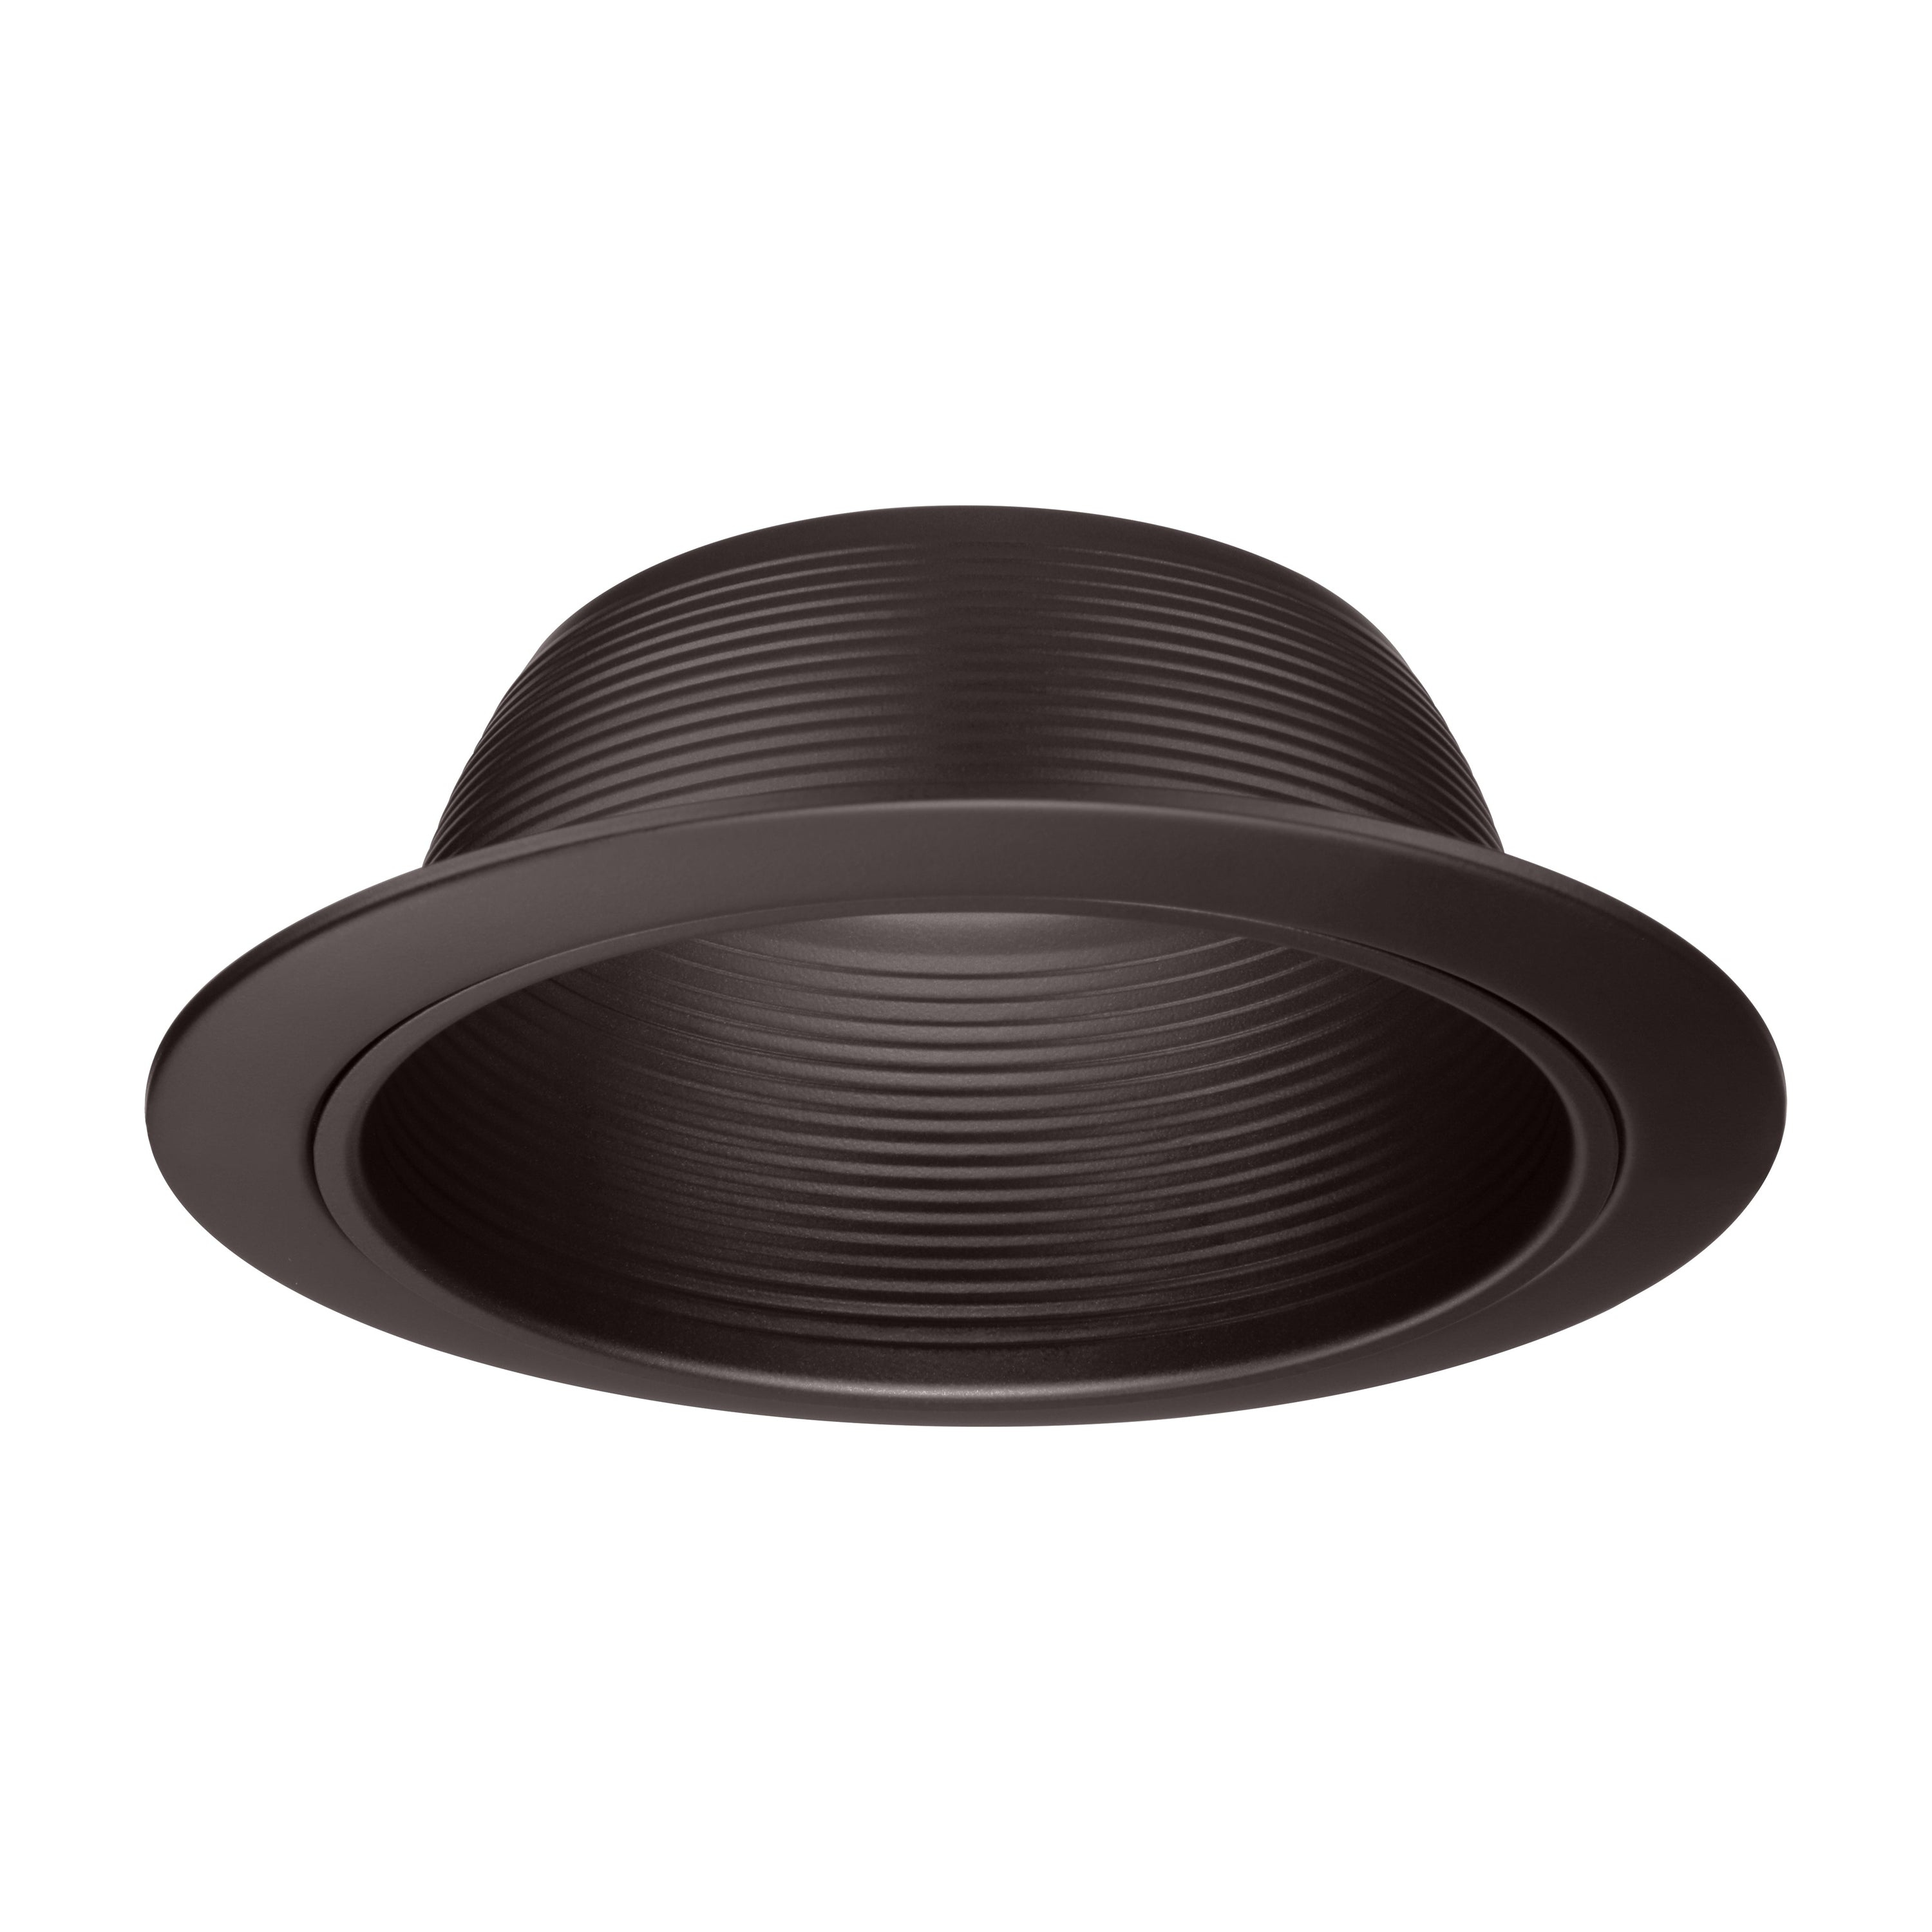 TORCHSTAR 6" Stepped Baffle with Detachable Trim - Oil Rubbed Bronze